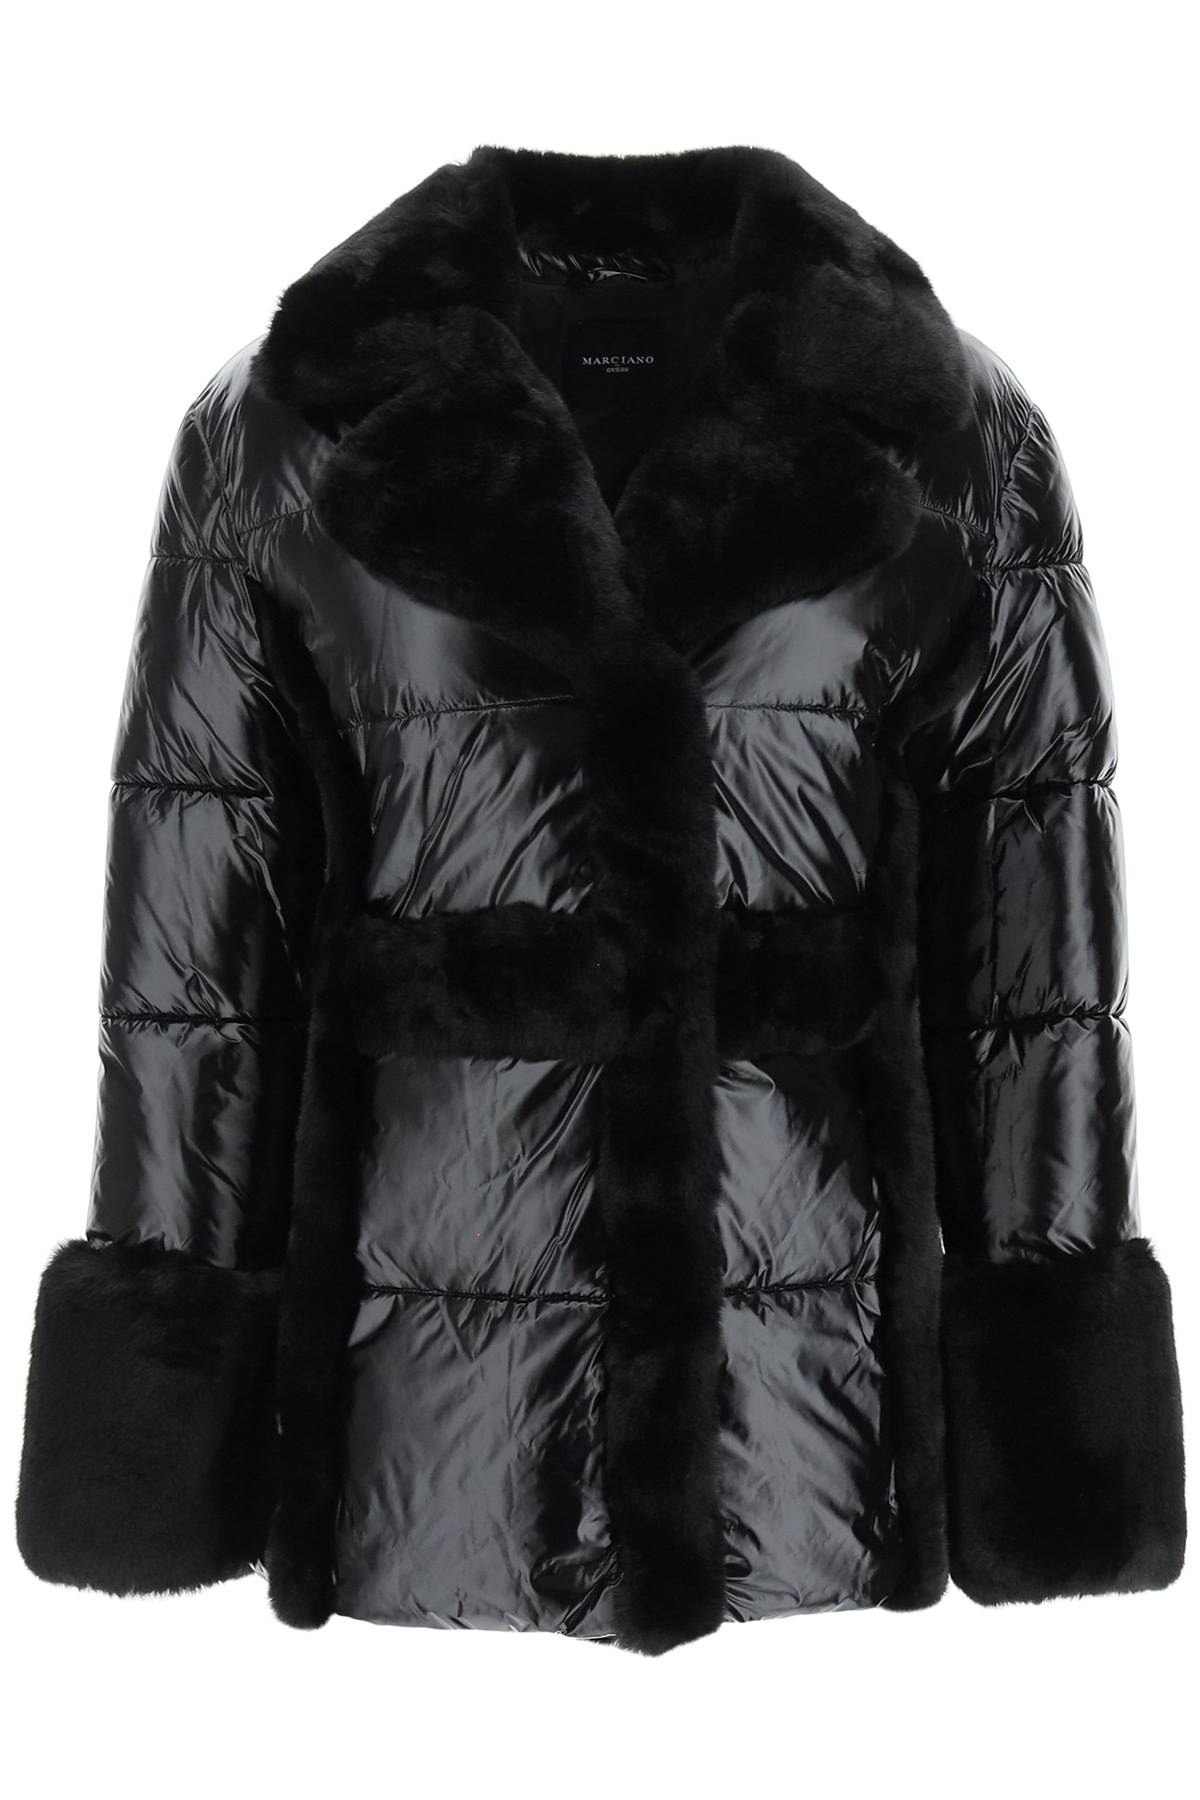 Guess By Marciano Puffer Jacket With Faux Fur Details In Jet Black A996 (black)